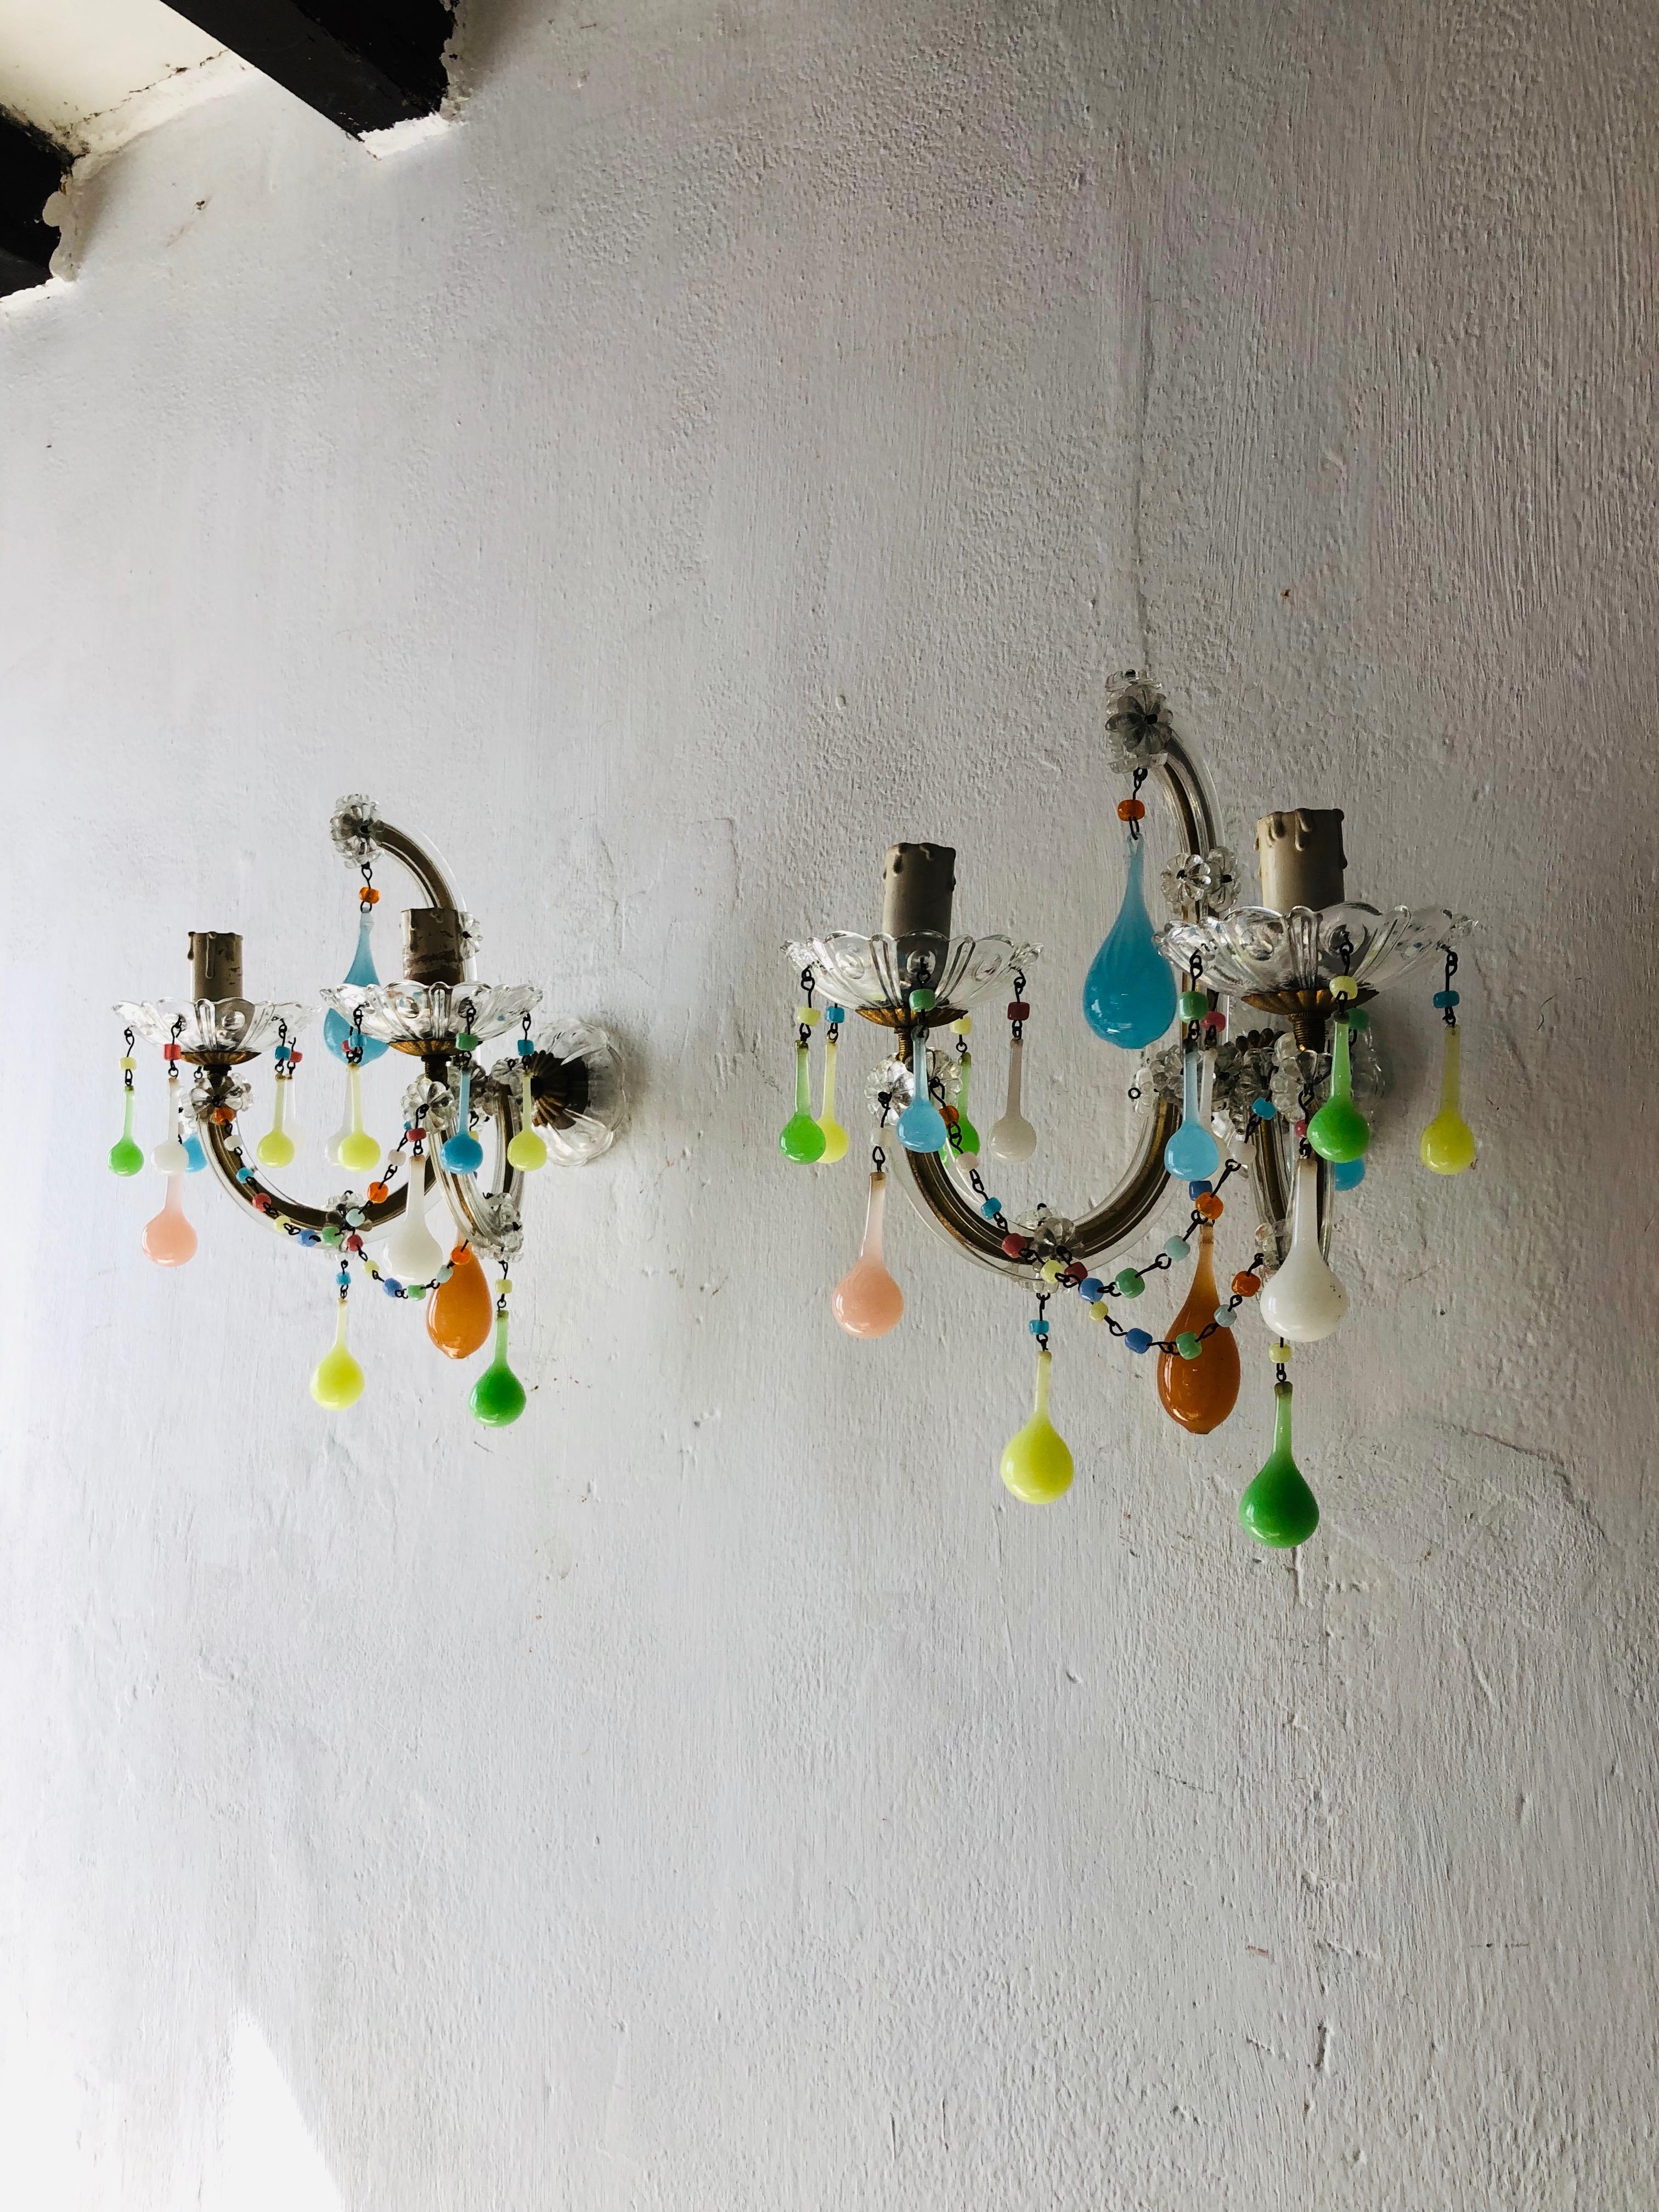 Re-wired and ready to hang! Housing two lights each, sitting in crystal bobeches dripping with pastel beads and opaline drops. Adorning big opaline drops as well. Free priority UPS shipping from Italy.